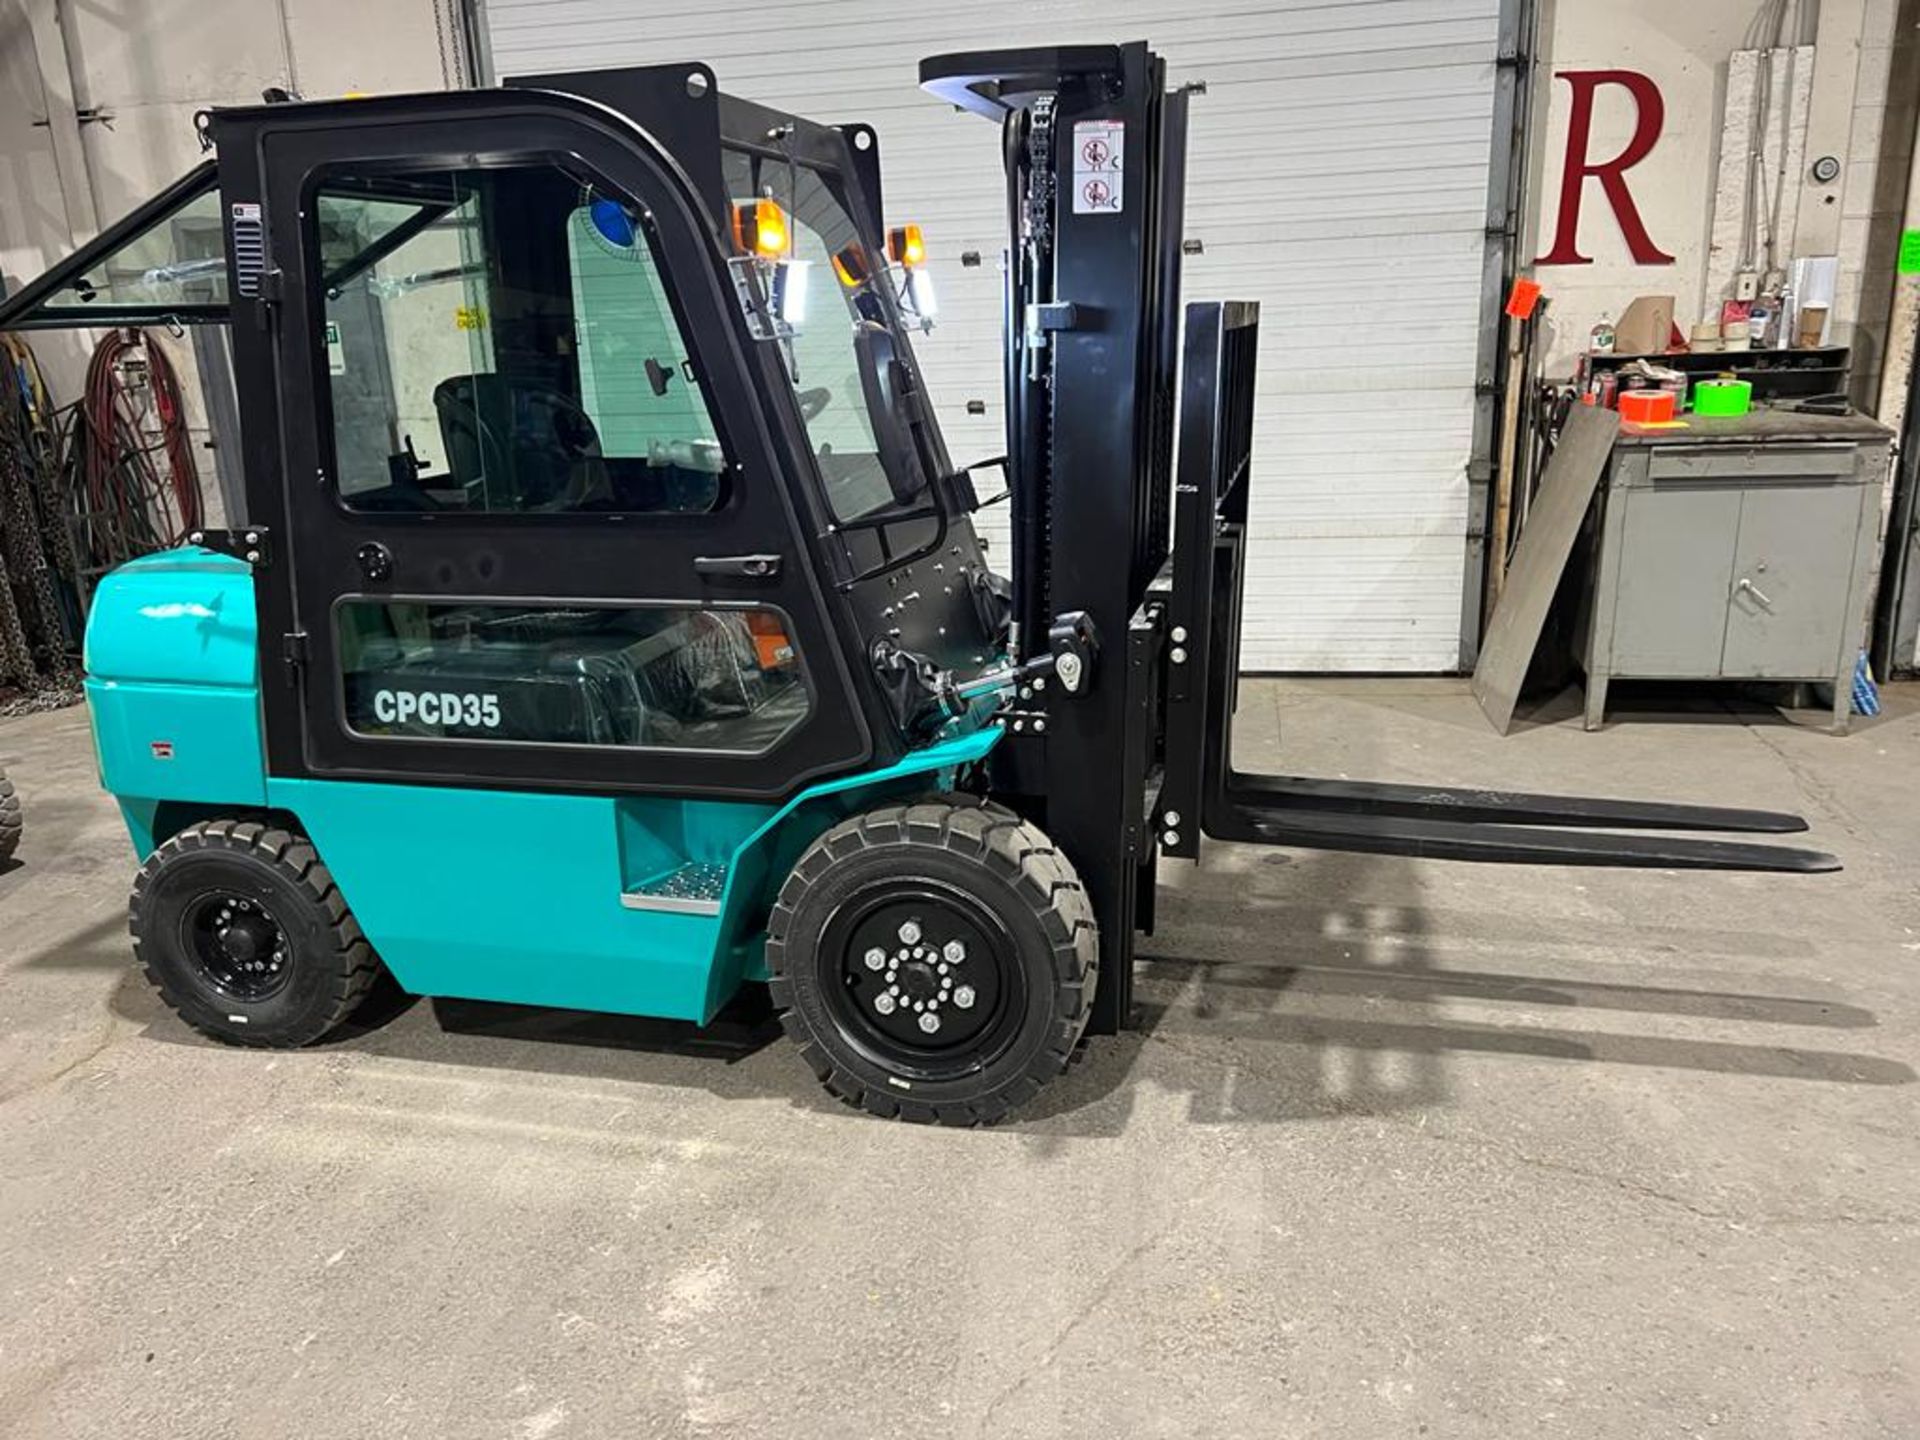 Brand New OMEGA CPCD35 Outdoor 7,000lbs Capacity Forklift - Diesel Powered, 3-stage Mast